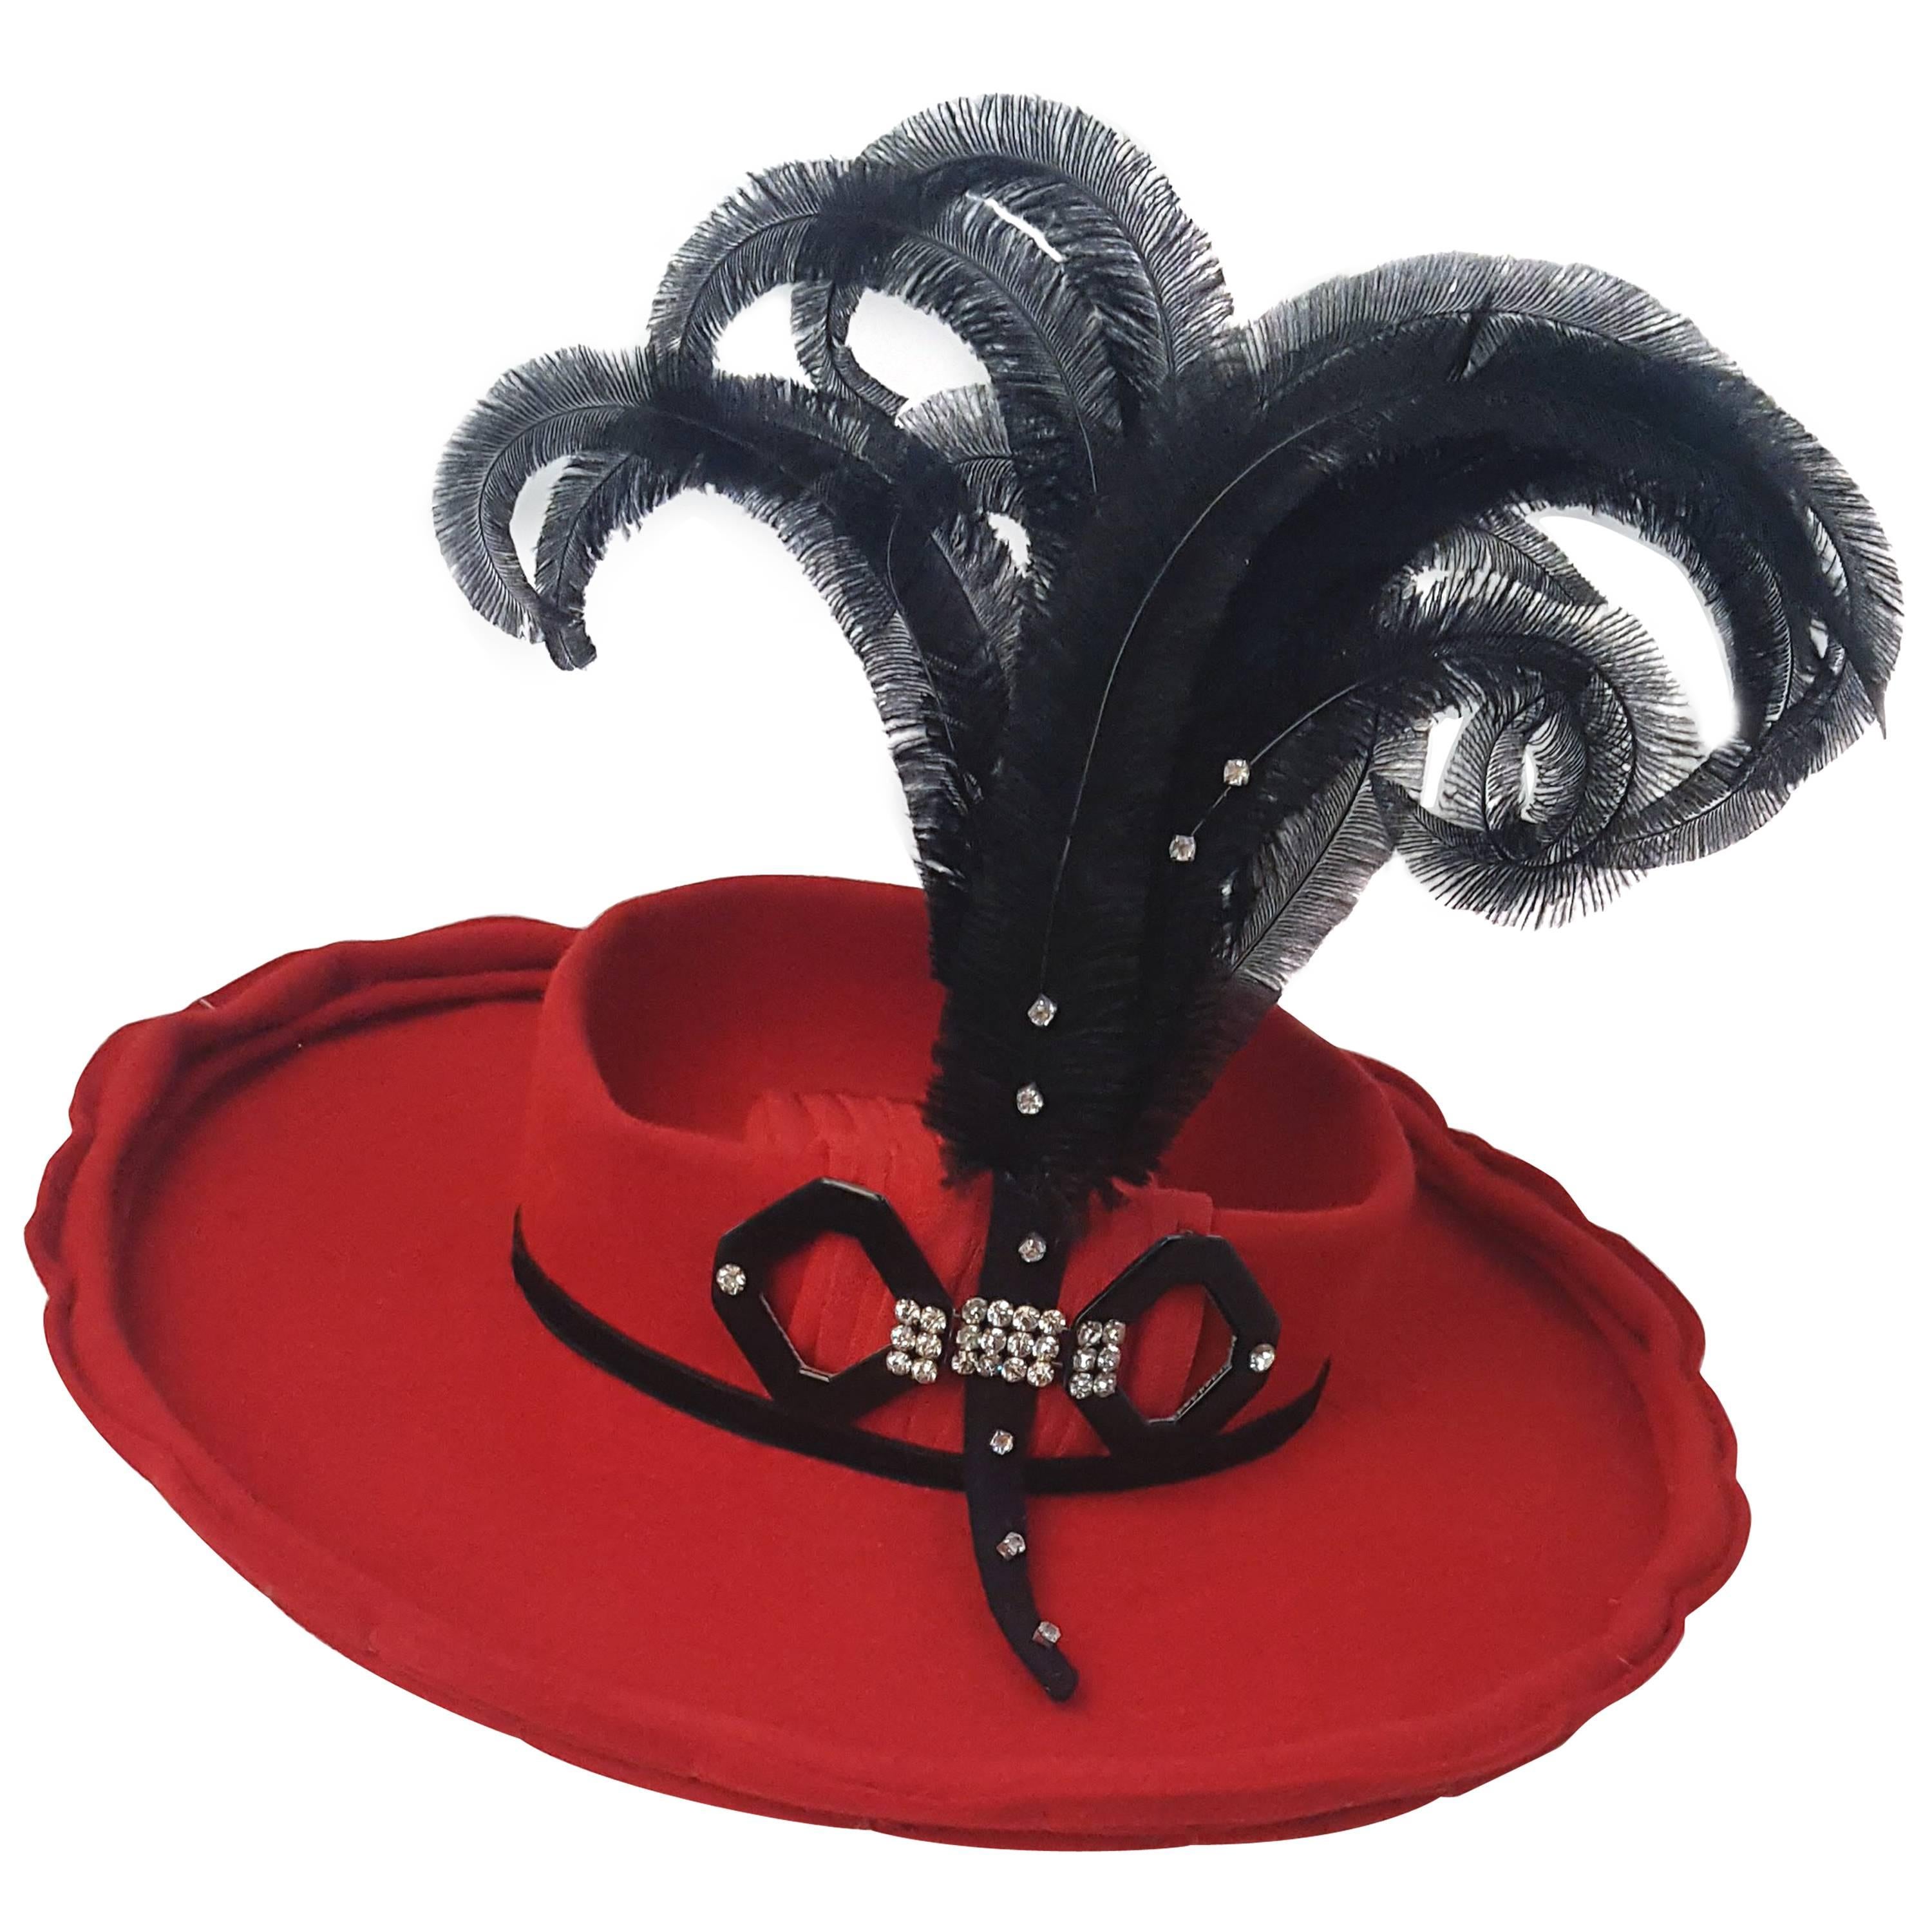 40s Red Felt Toy Fashion Hat with Hand Curled Feathers 